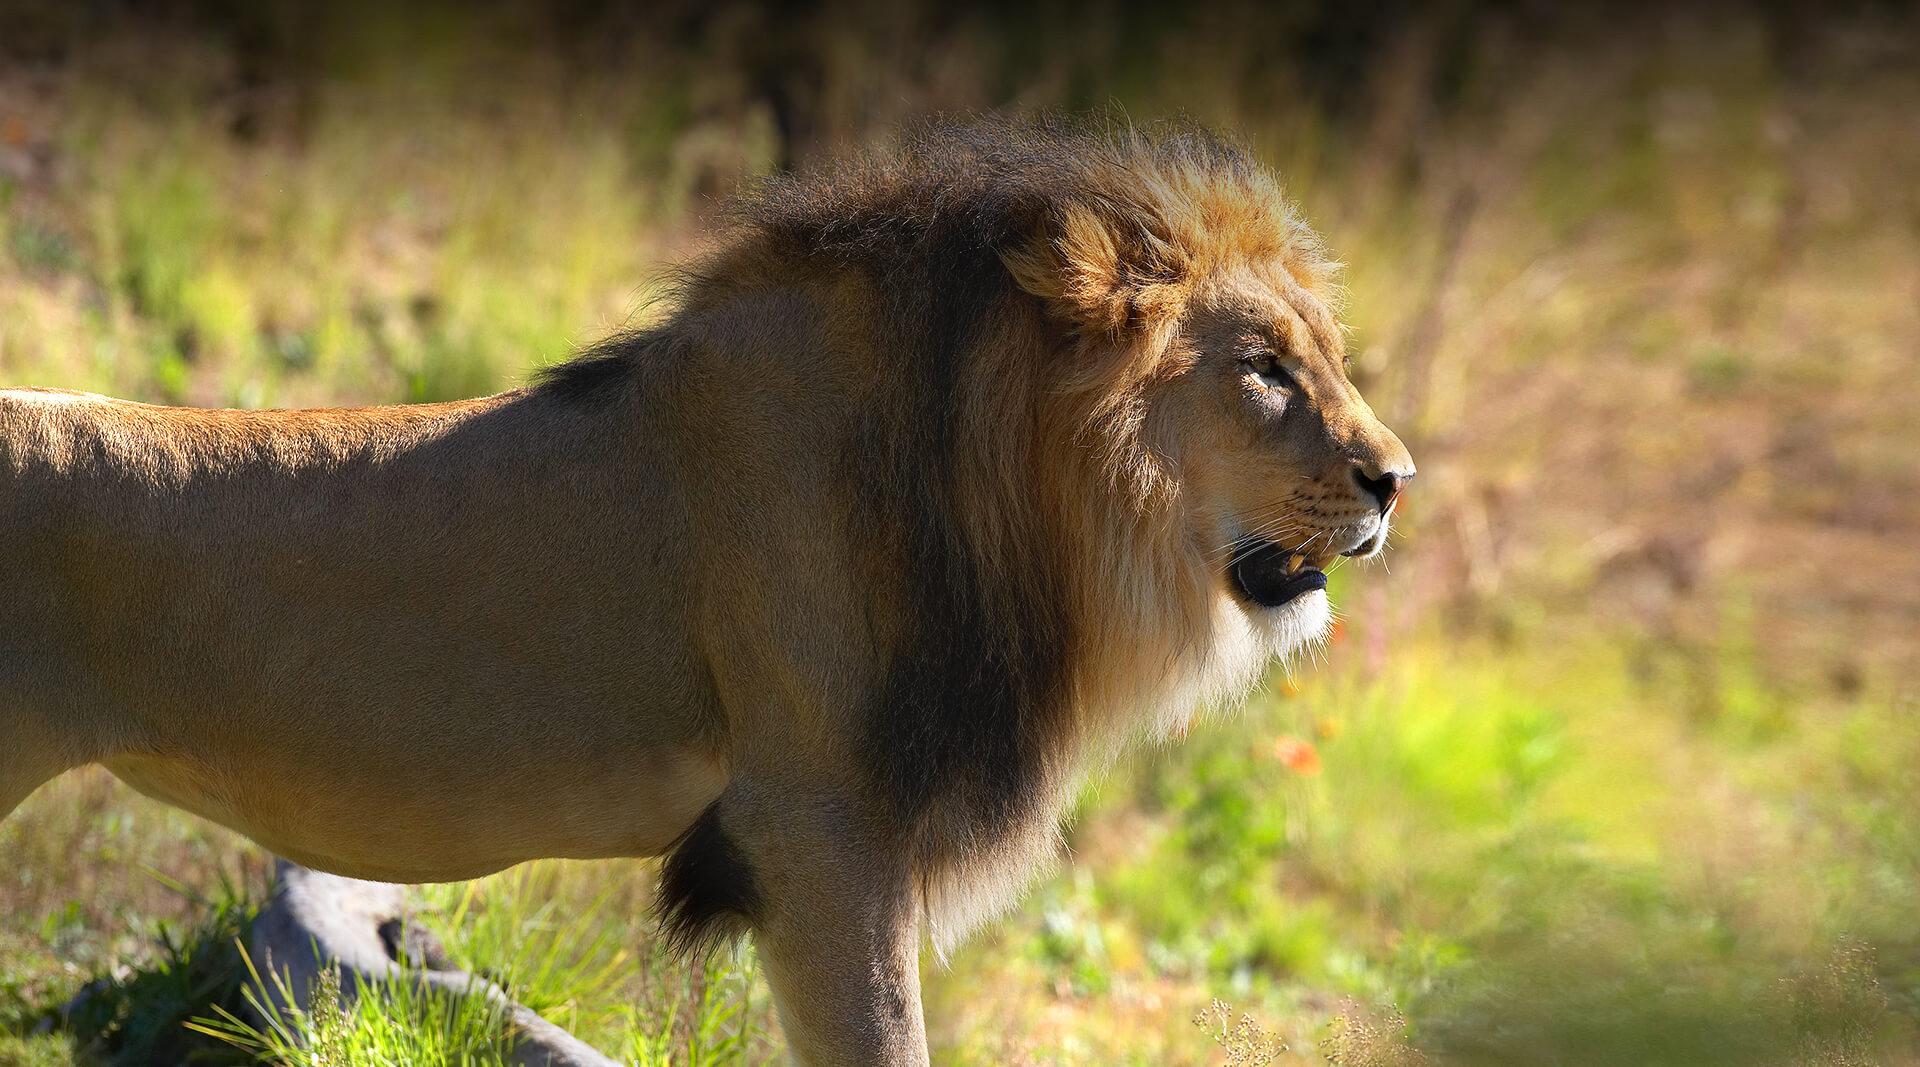 Male lion standing in lush grass.